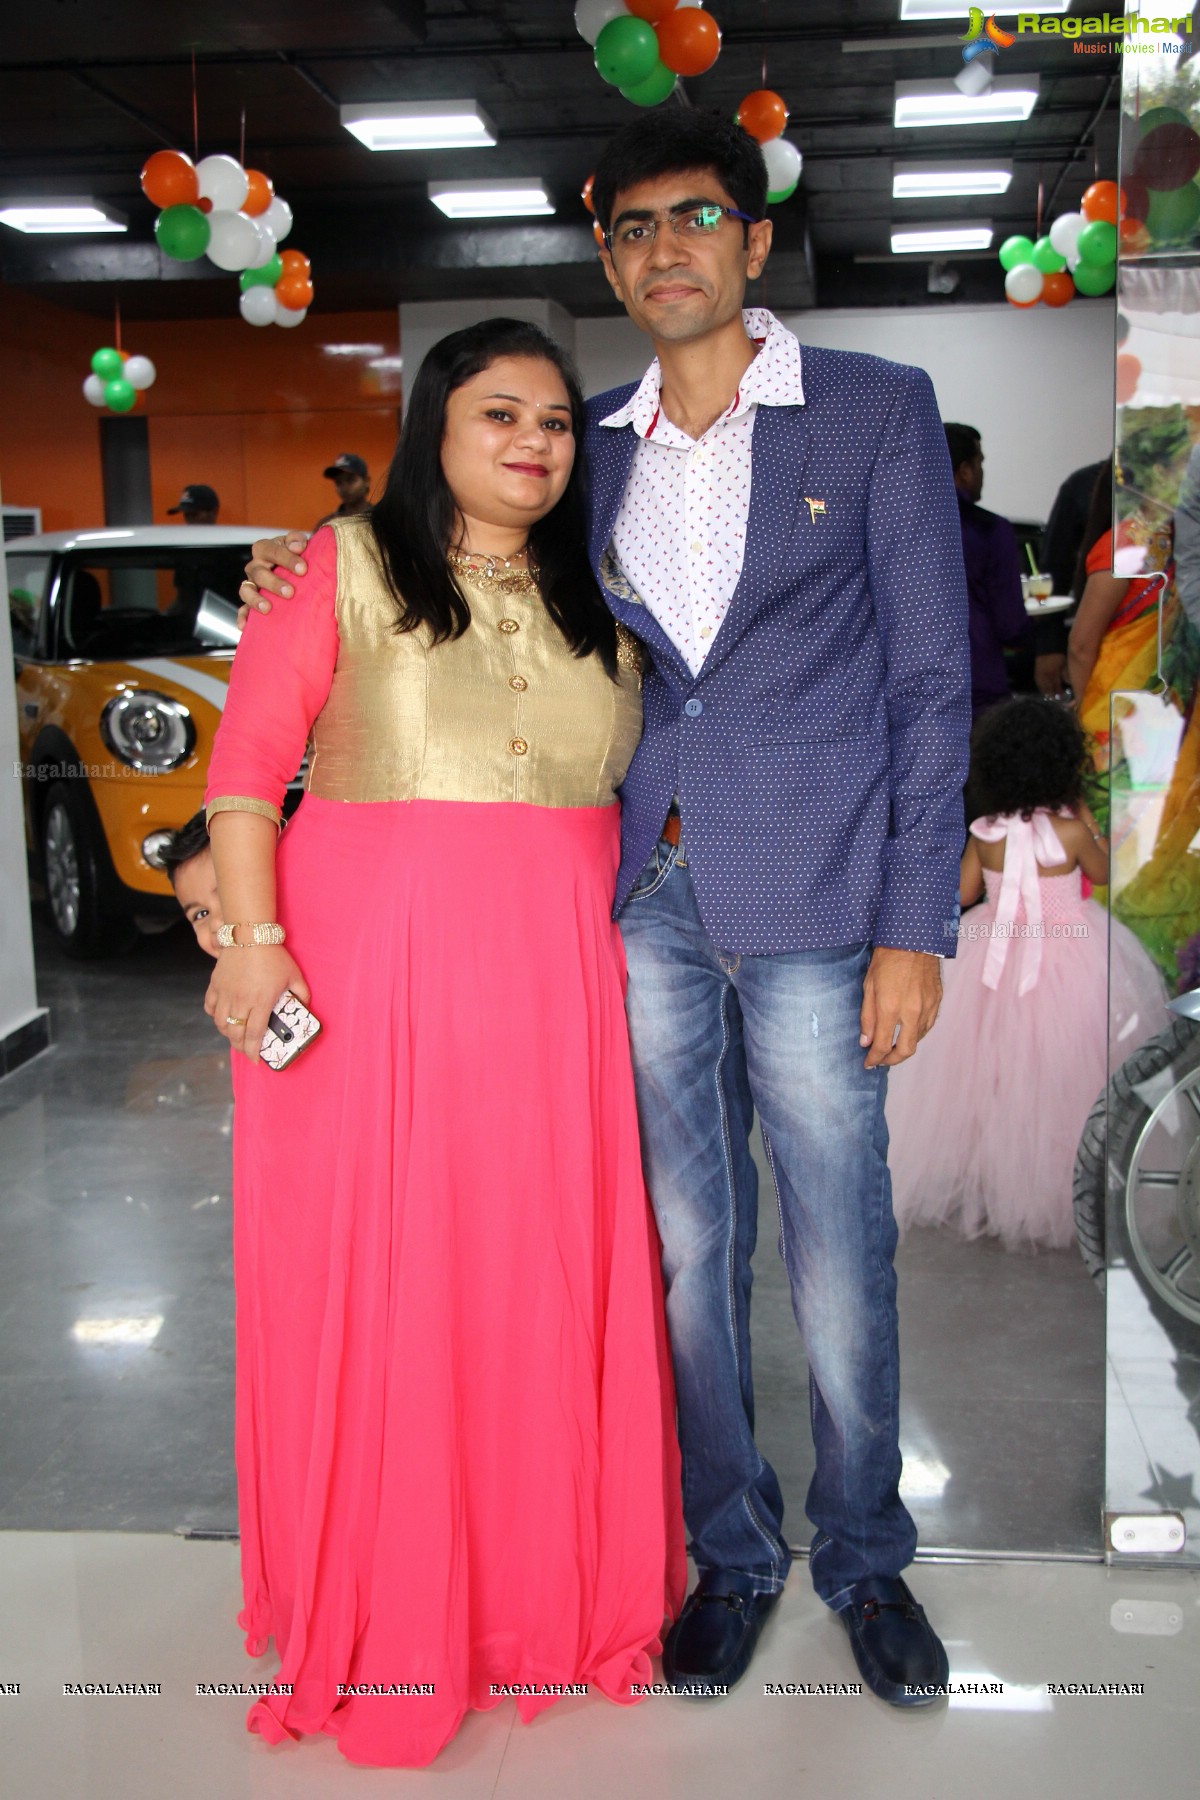 Motorcoats Autospa Launch at Jubilee Hills, Hyderabad